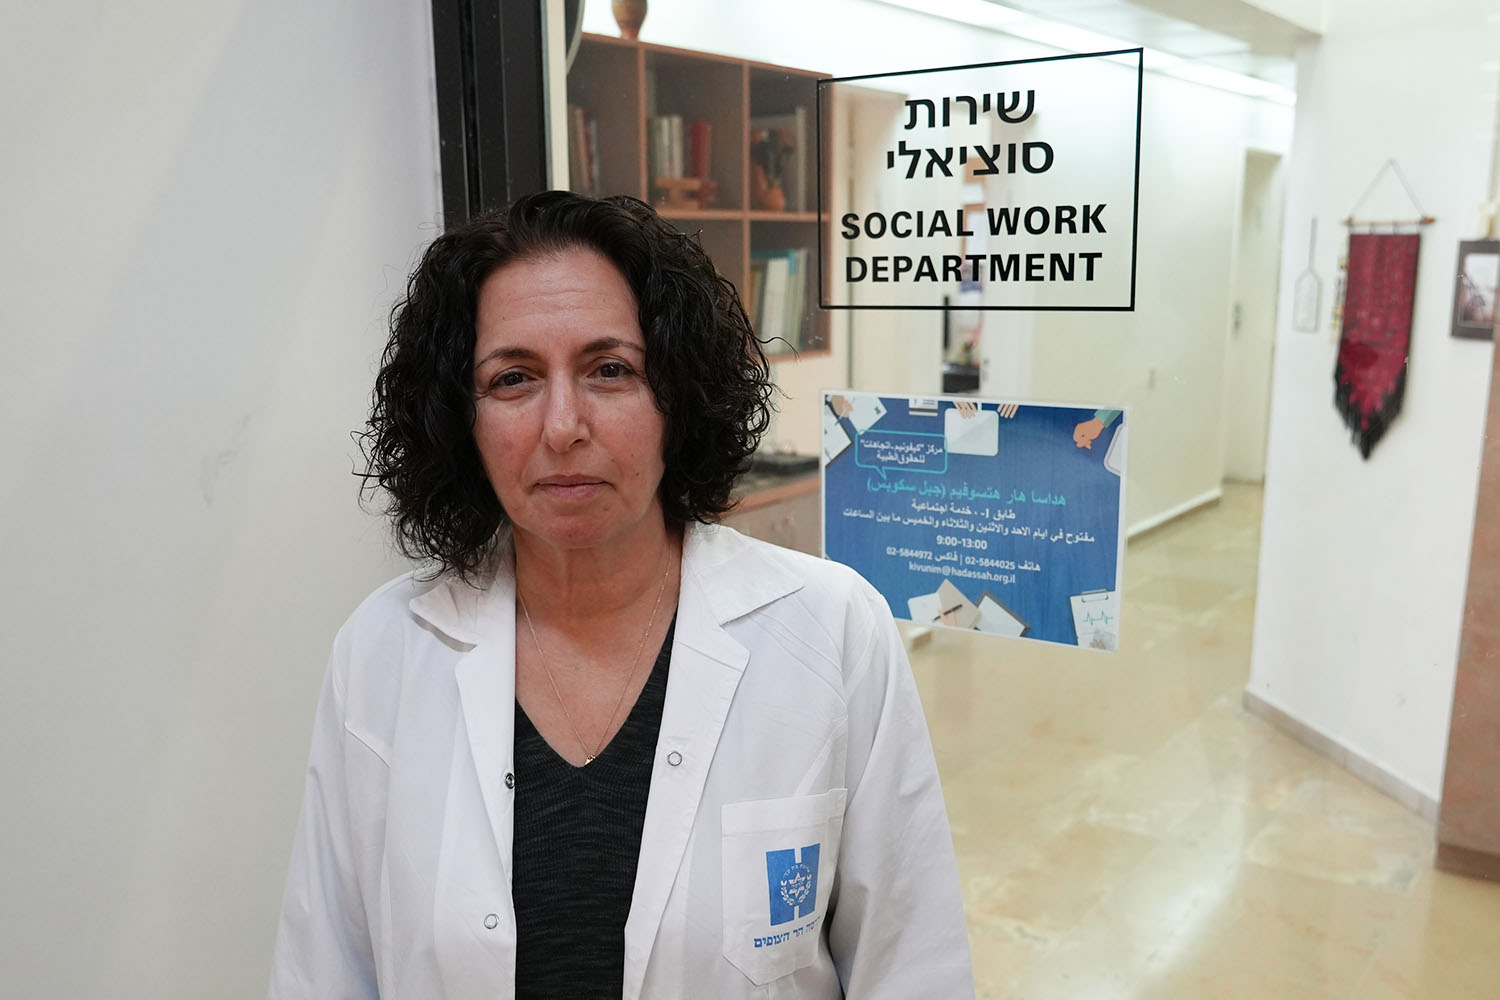 Noa Shemesh is the director of the social work department at Hadassah Mount Scopus Hospital. &quot;In this case, we could not save our friend.&quot; (Photo: Julia Larma)